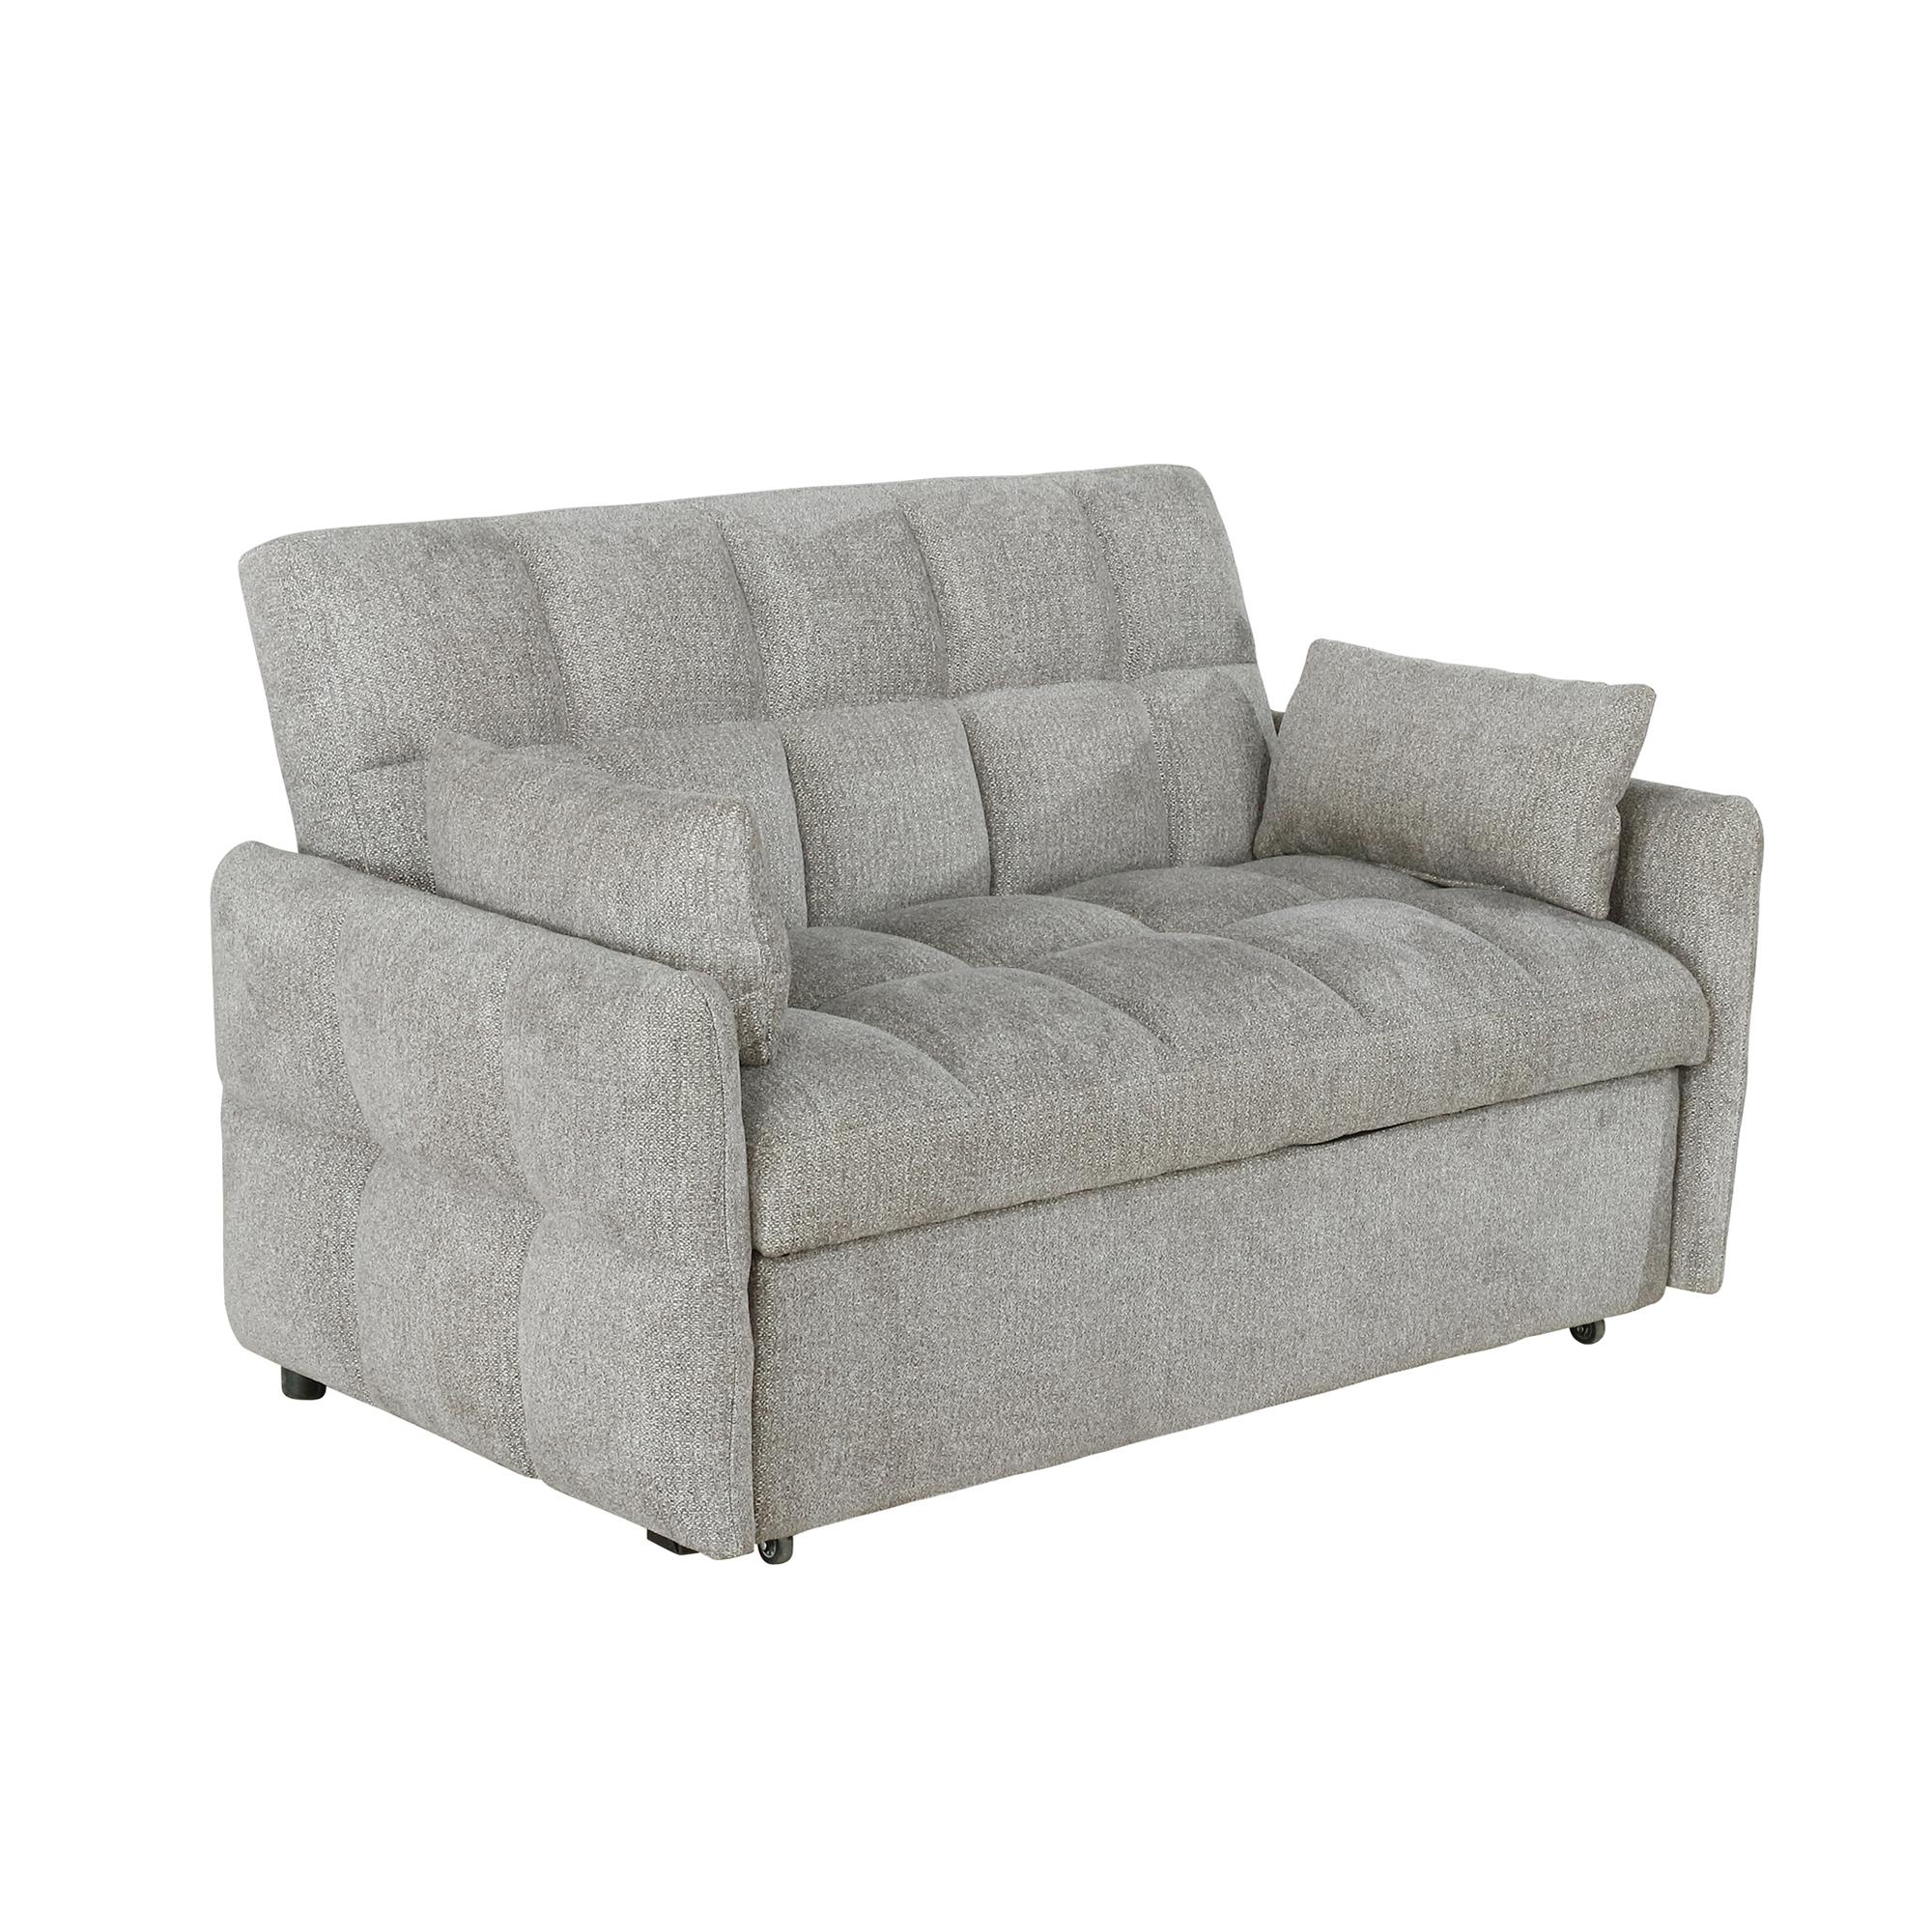 

    
Transitional Beige Chenille Sleeper Sofa Bed Coaster 508307 Cotswold
